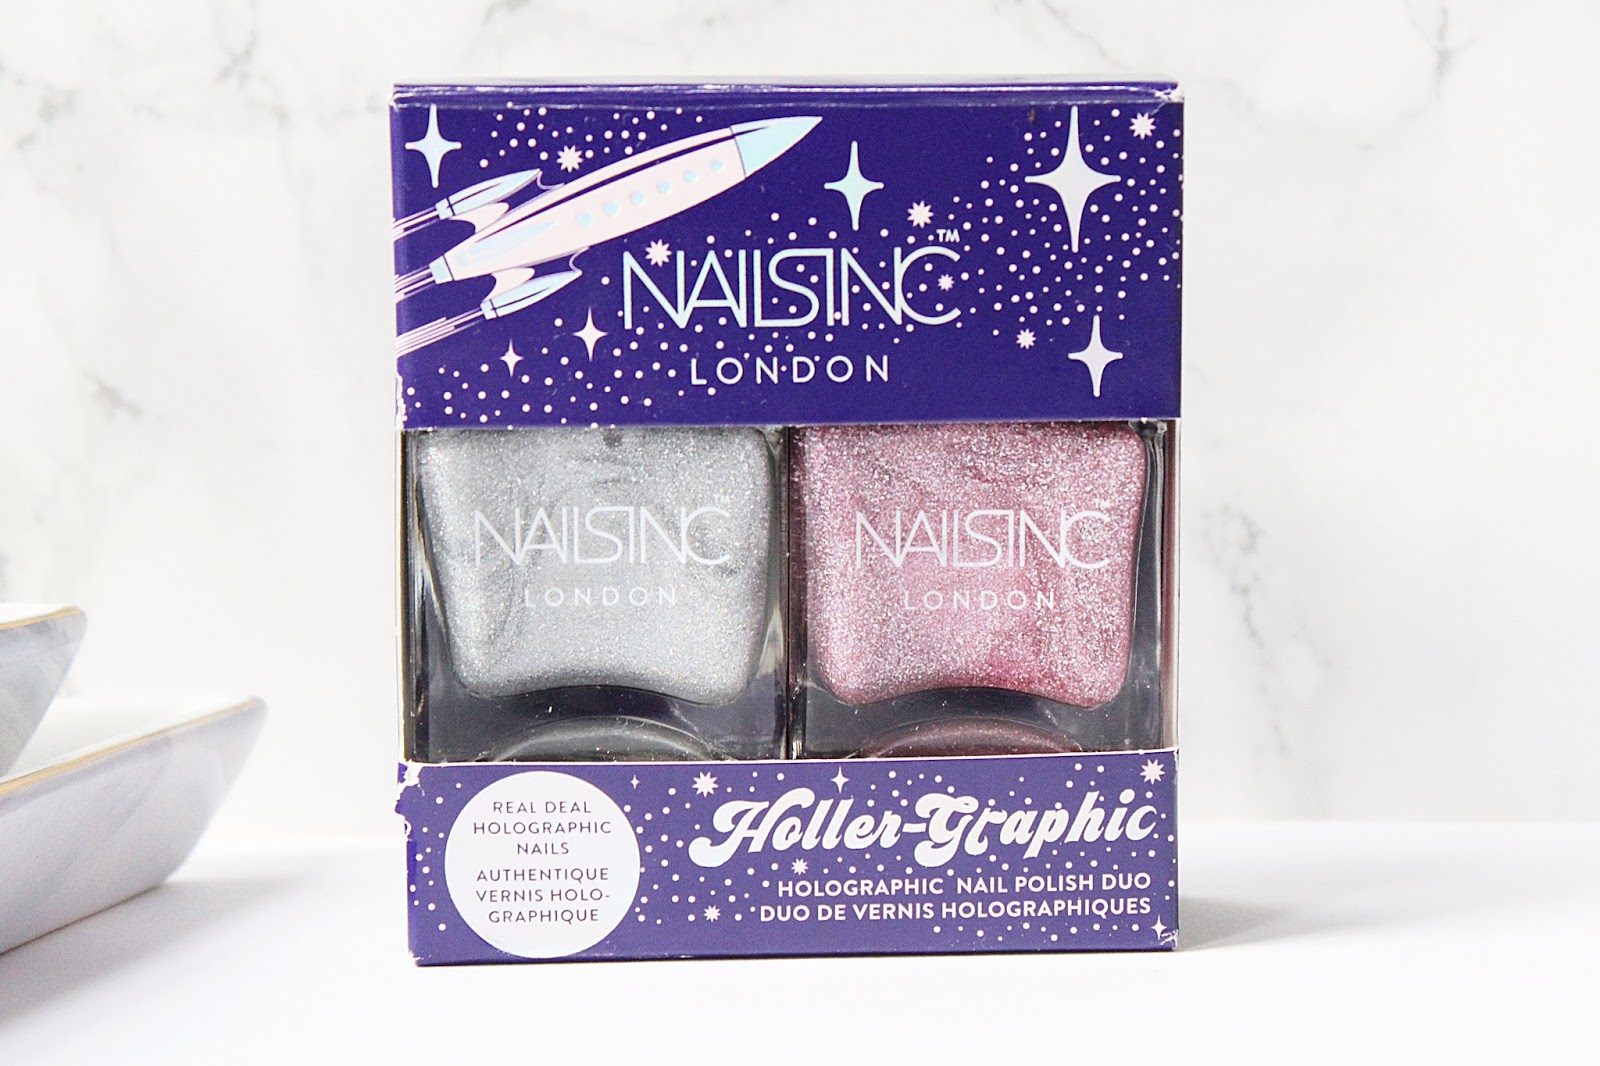 Nails Inc Holler-Graphic Nail Polish Duo Review (+ Swatches 